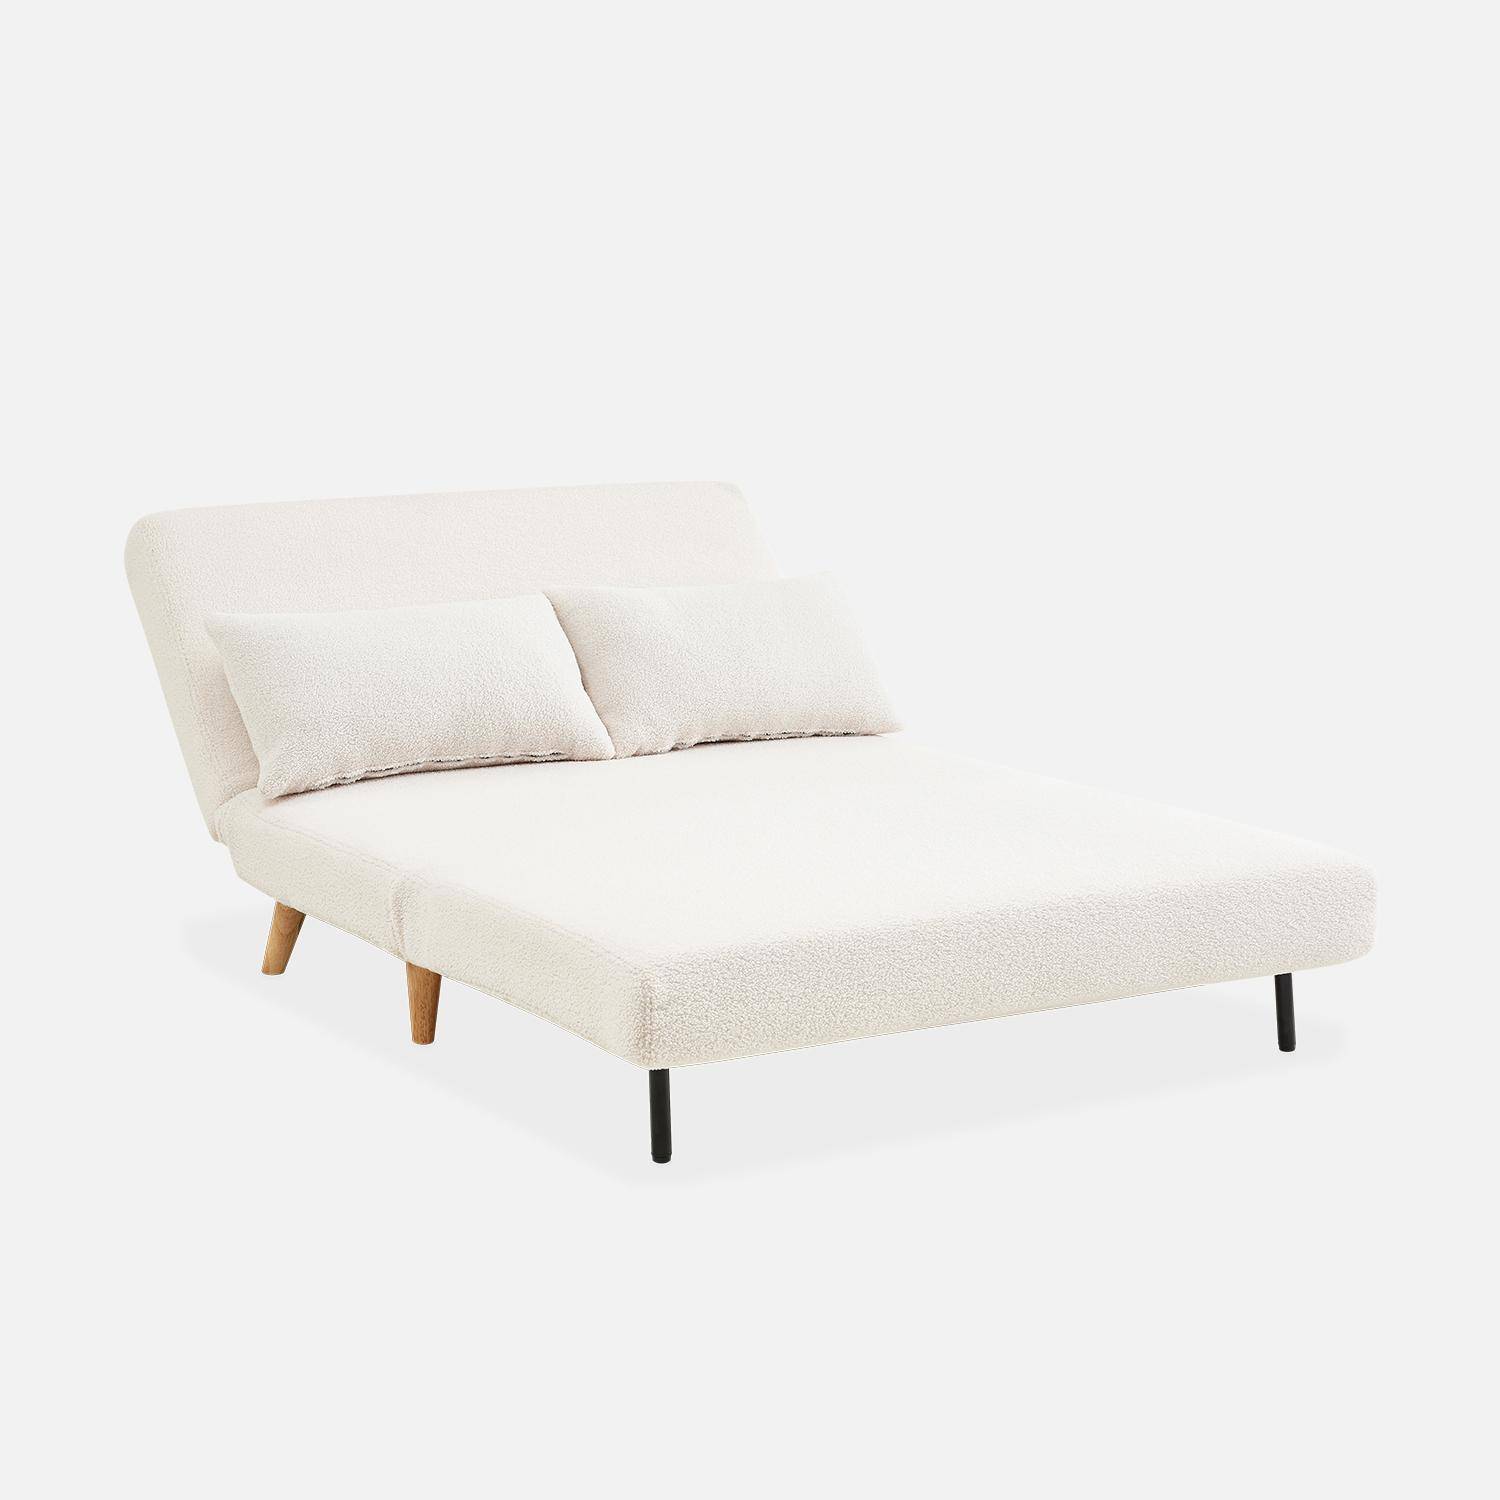 Sleeper, 2-Seater Convertible Sofa with Wooden Legs,  L120xW81xH82cm, white bouclette Photo6